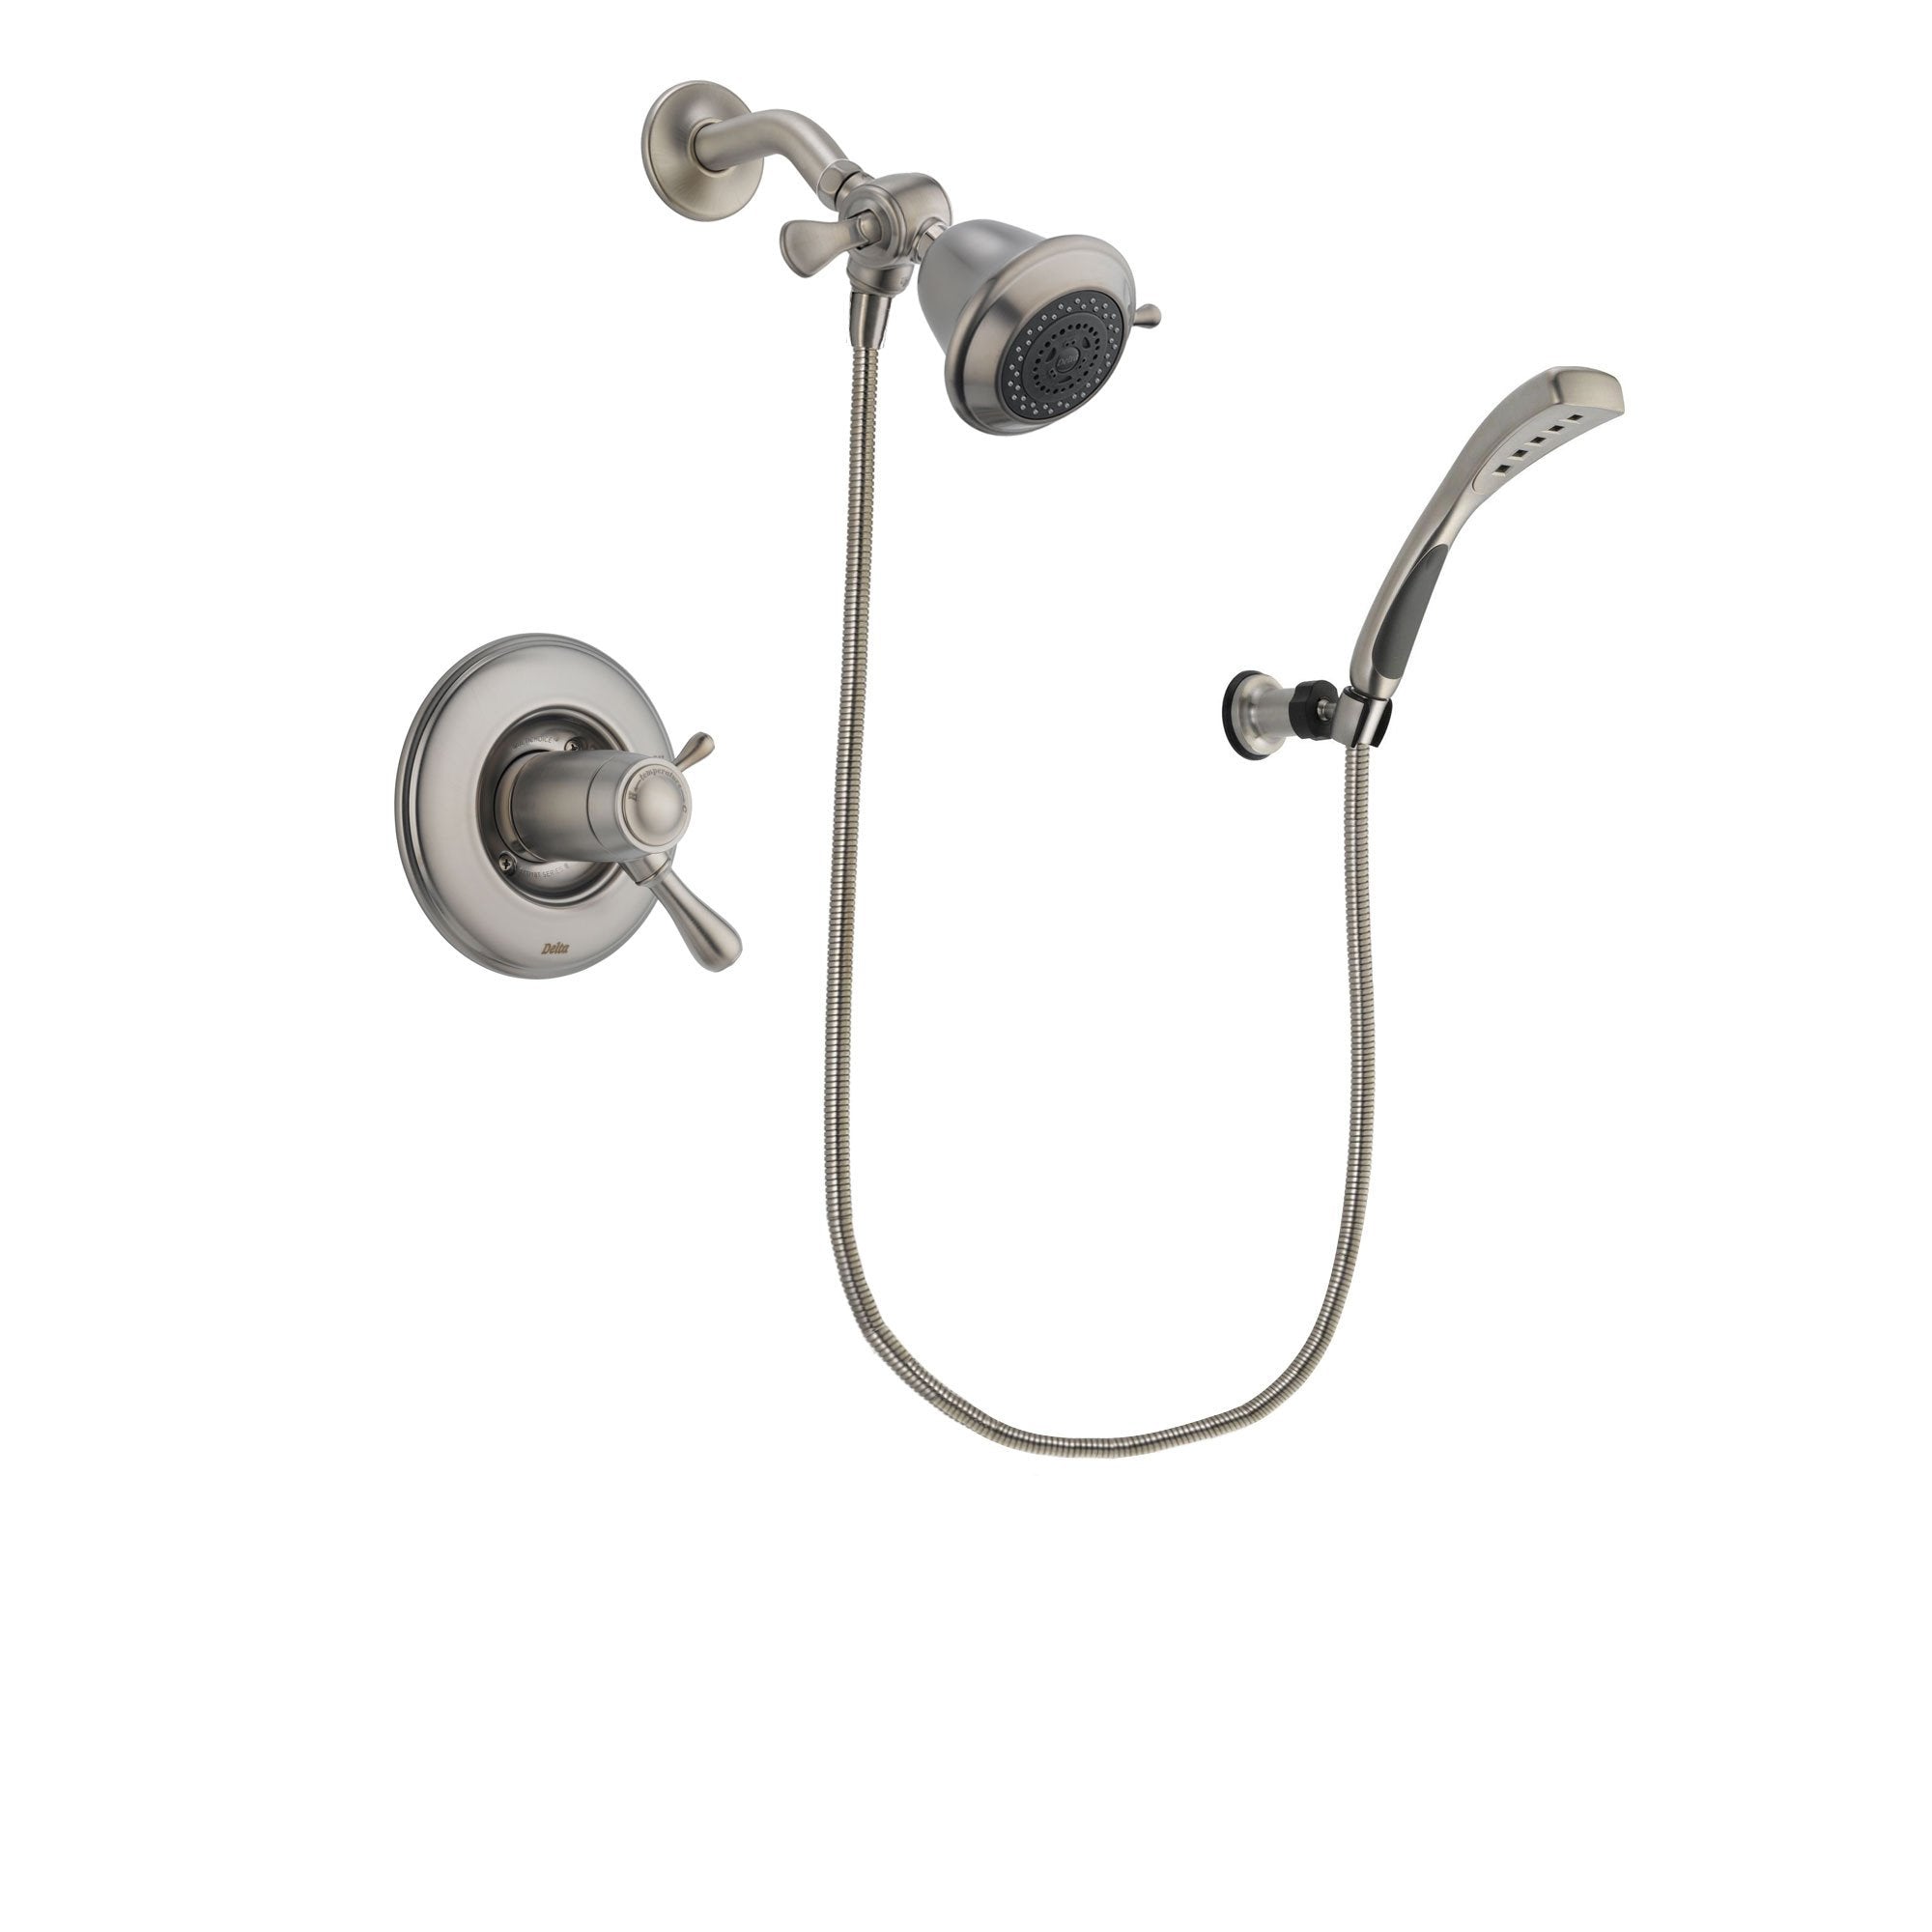 Delta Leland Stainless Steel Finish Thermostatic Shower Faucet System Package with Shower Head and Wall Mounted Handshower Includes Rough-in Valve DSP1790V